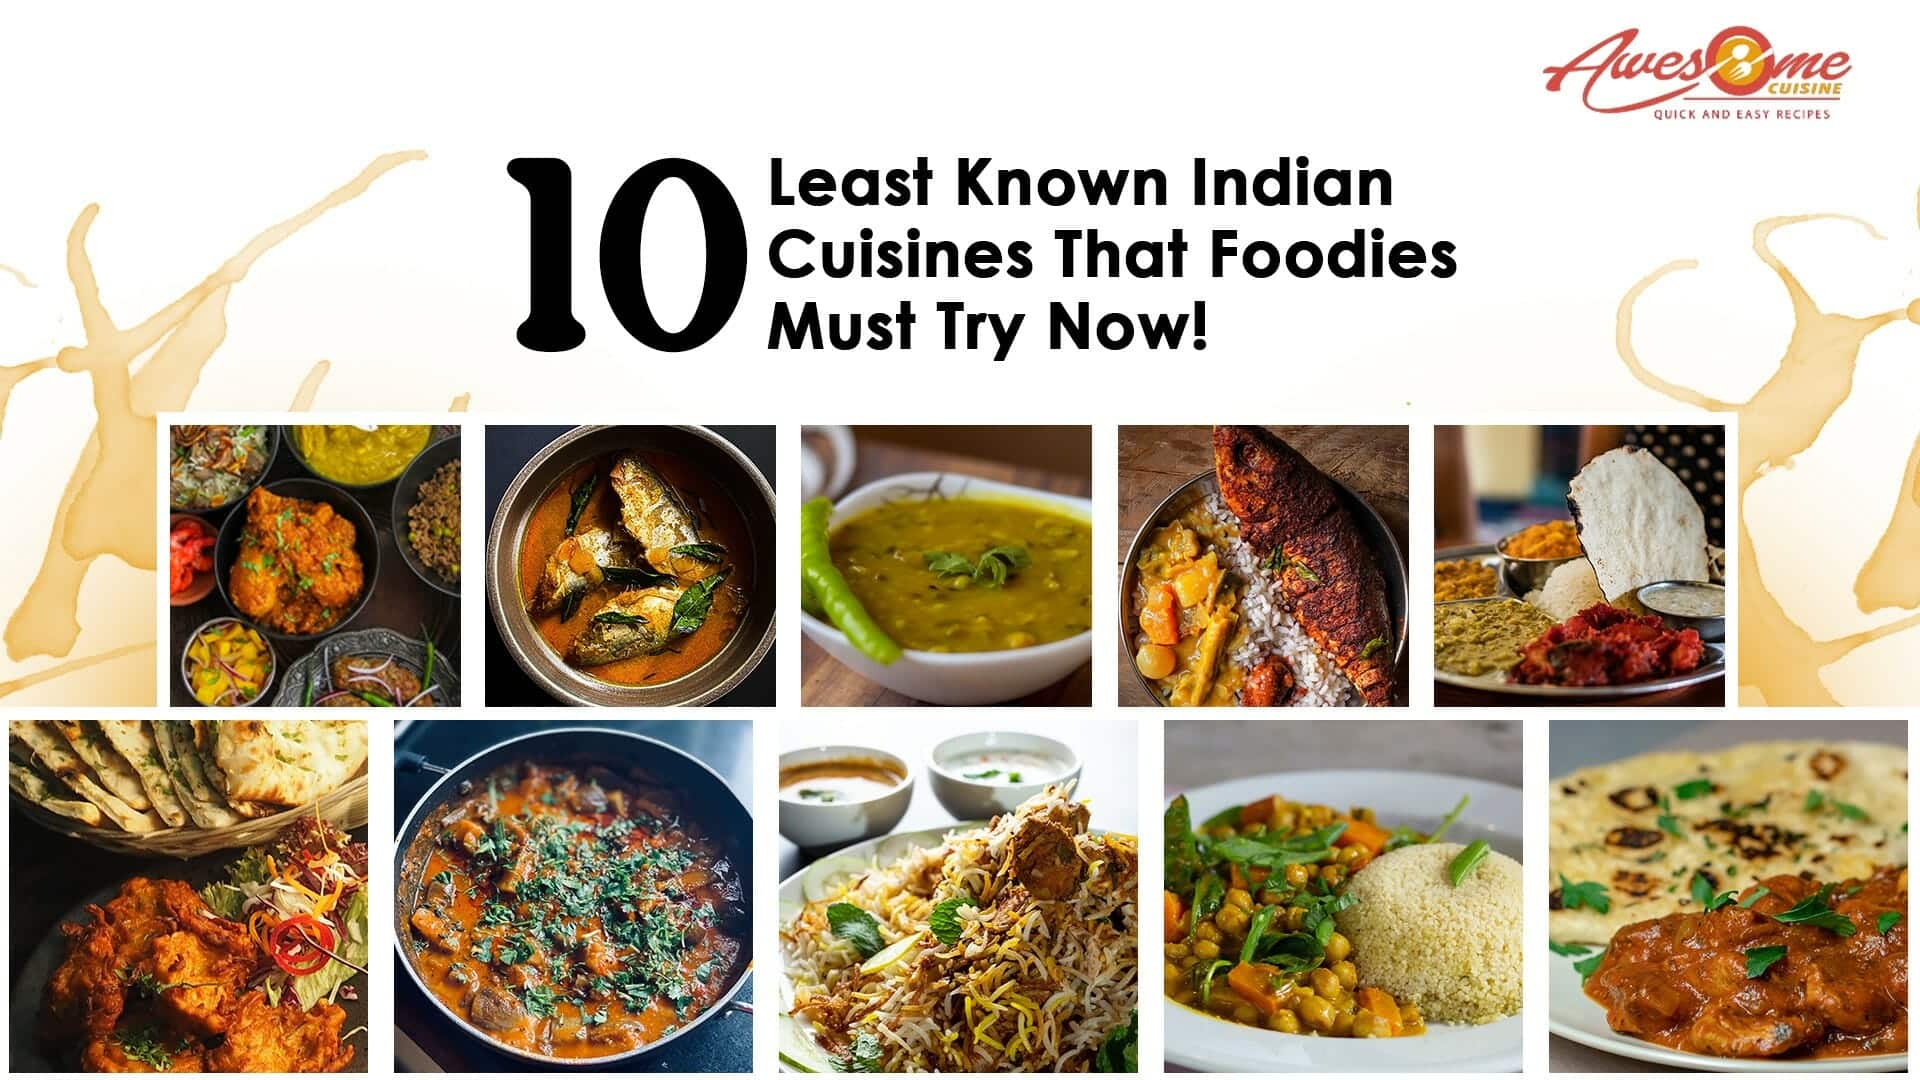 10 Lesser-known Indian Cuisines That Are Must-try For Foodies